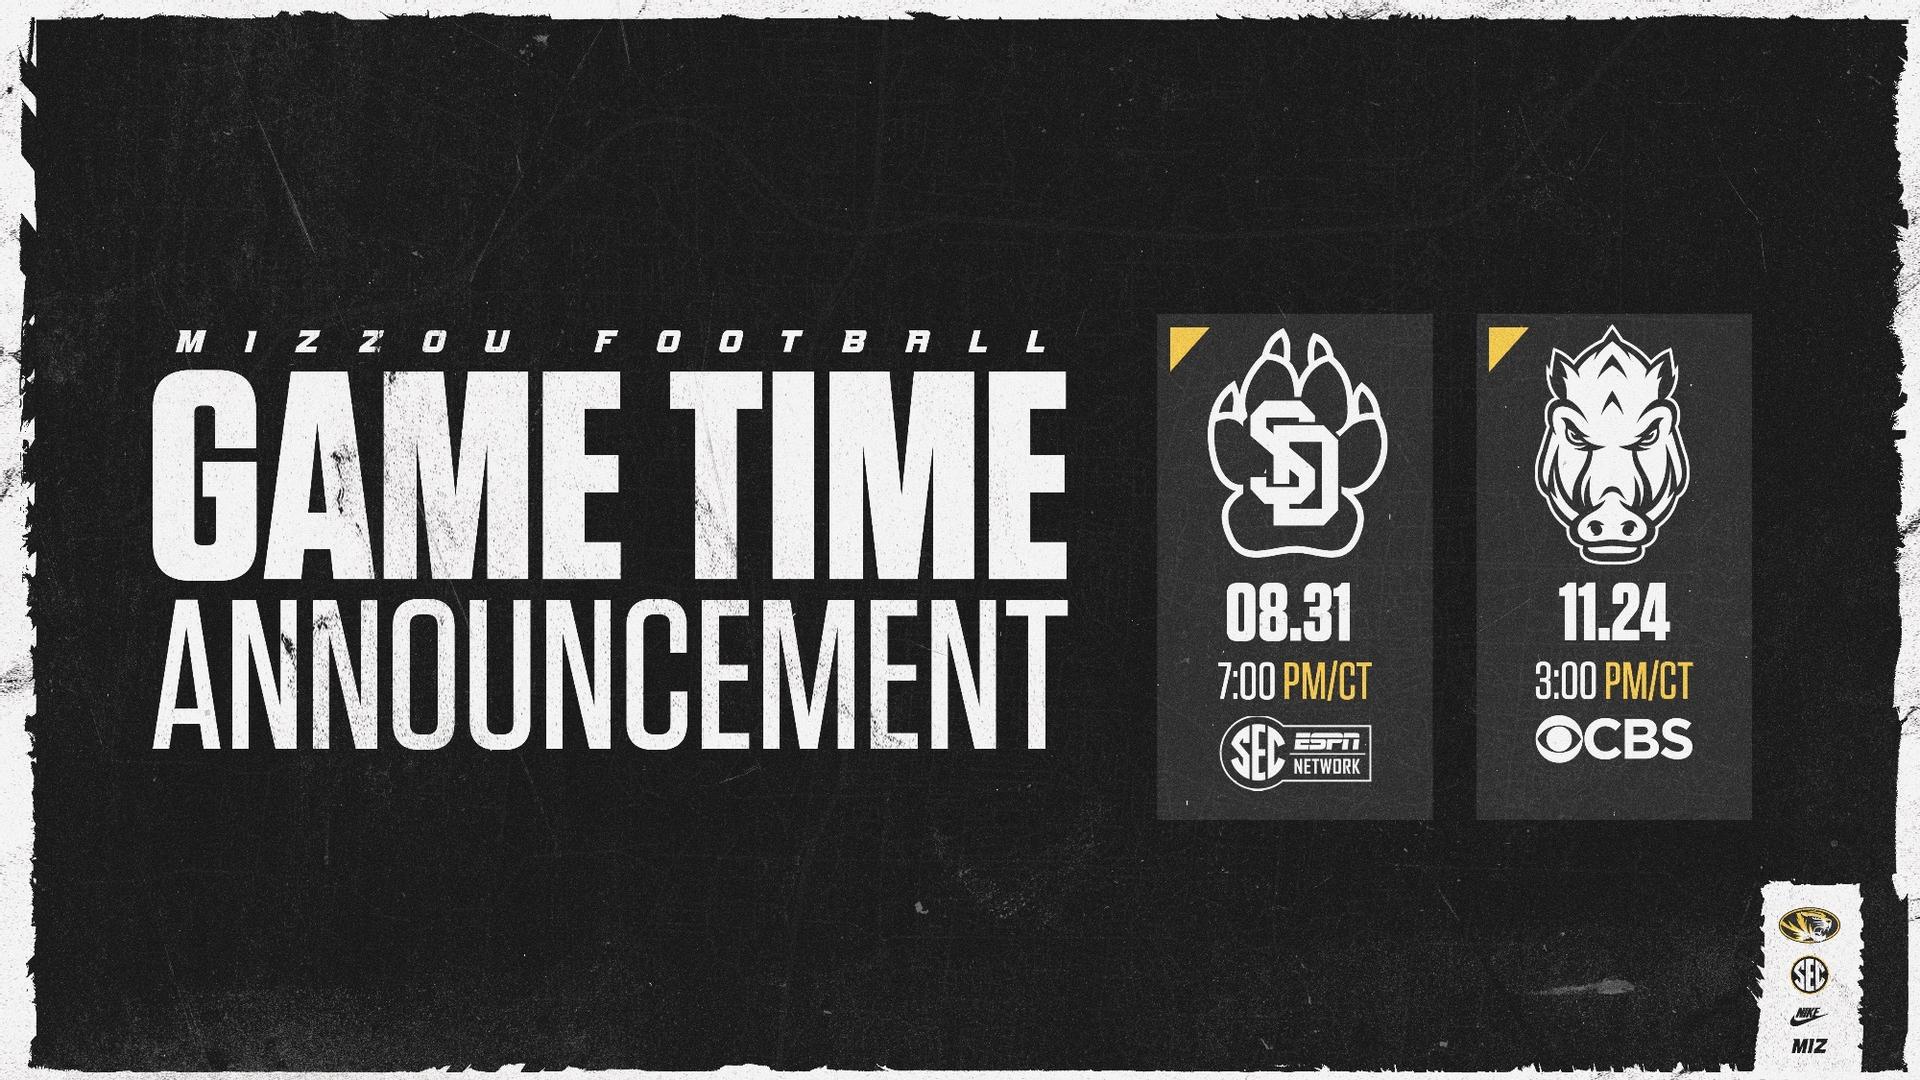 052523_FB Game Date Change Announcement